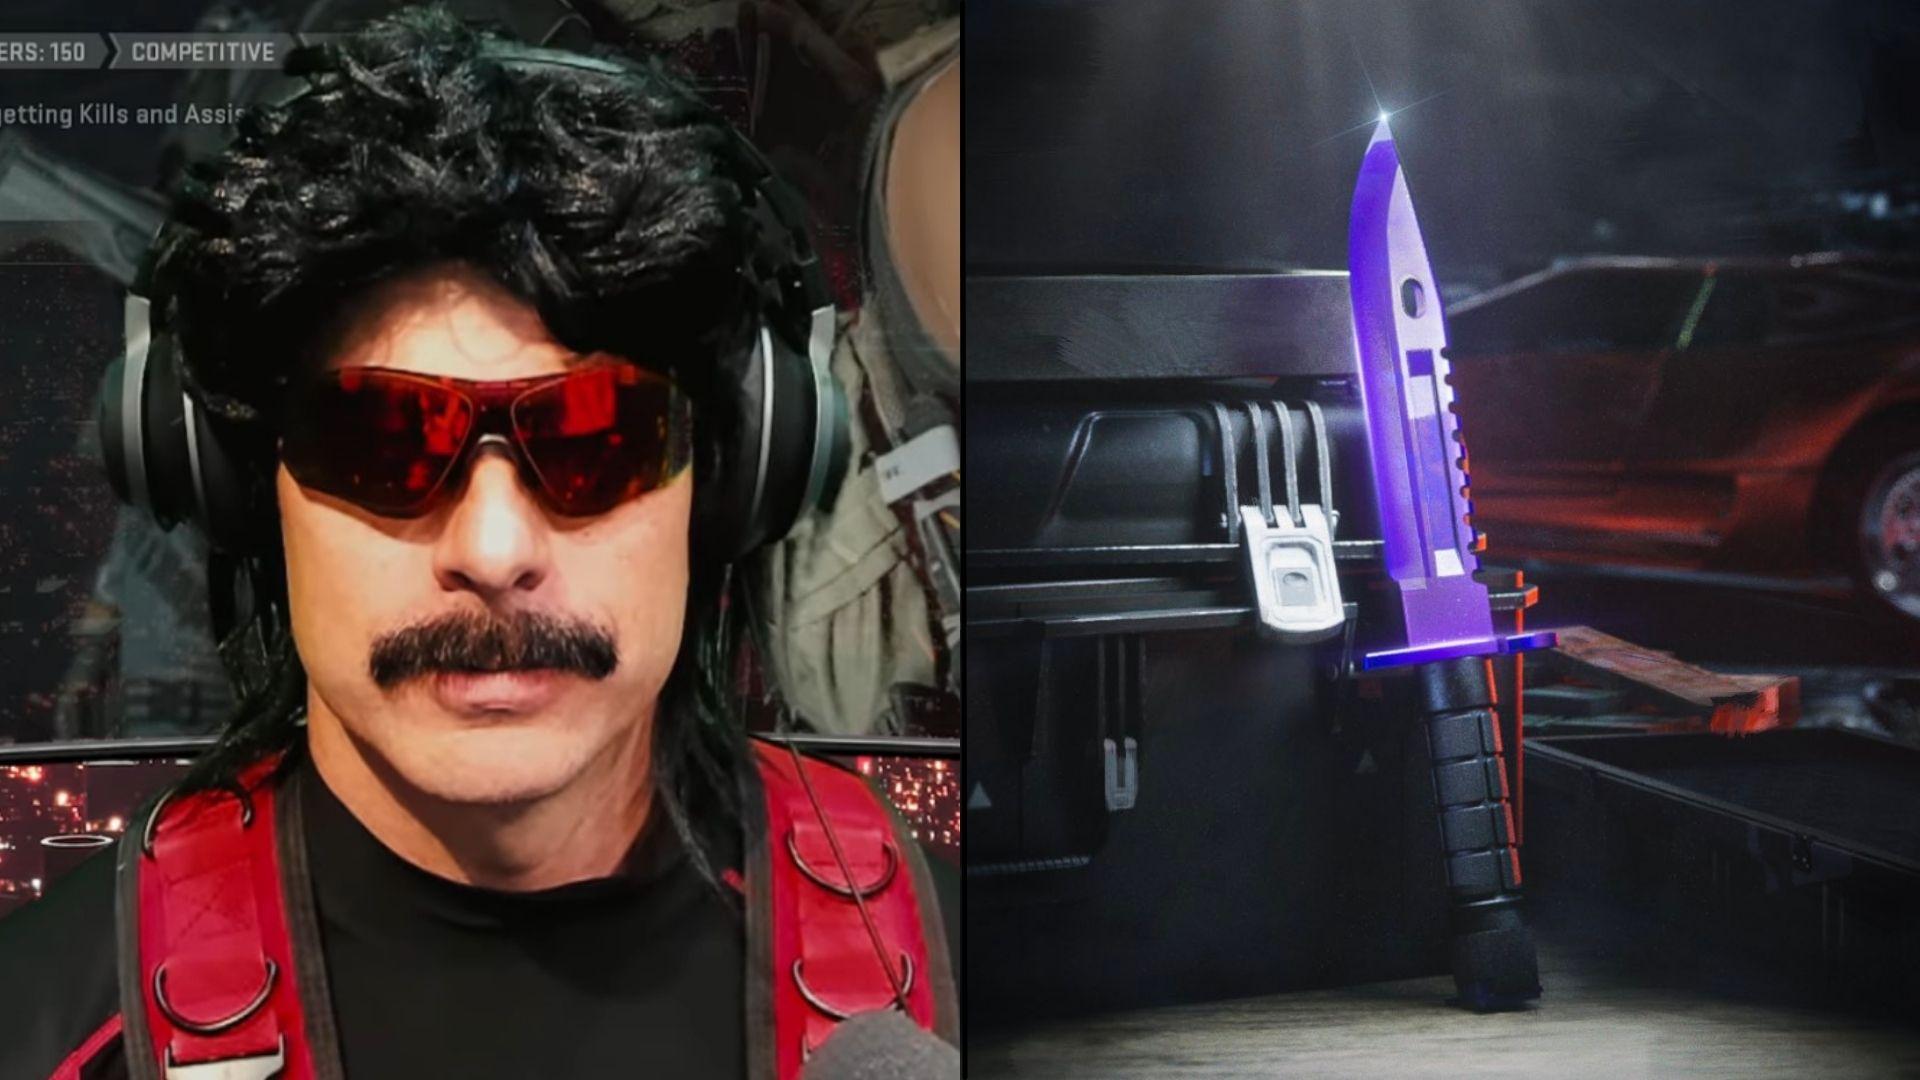 Dr Disrespect side-by-side with purple knife in CSGO